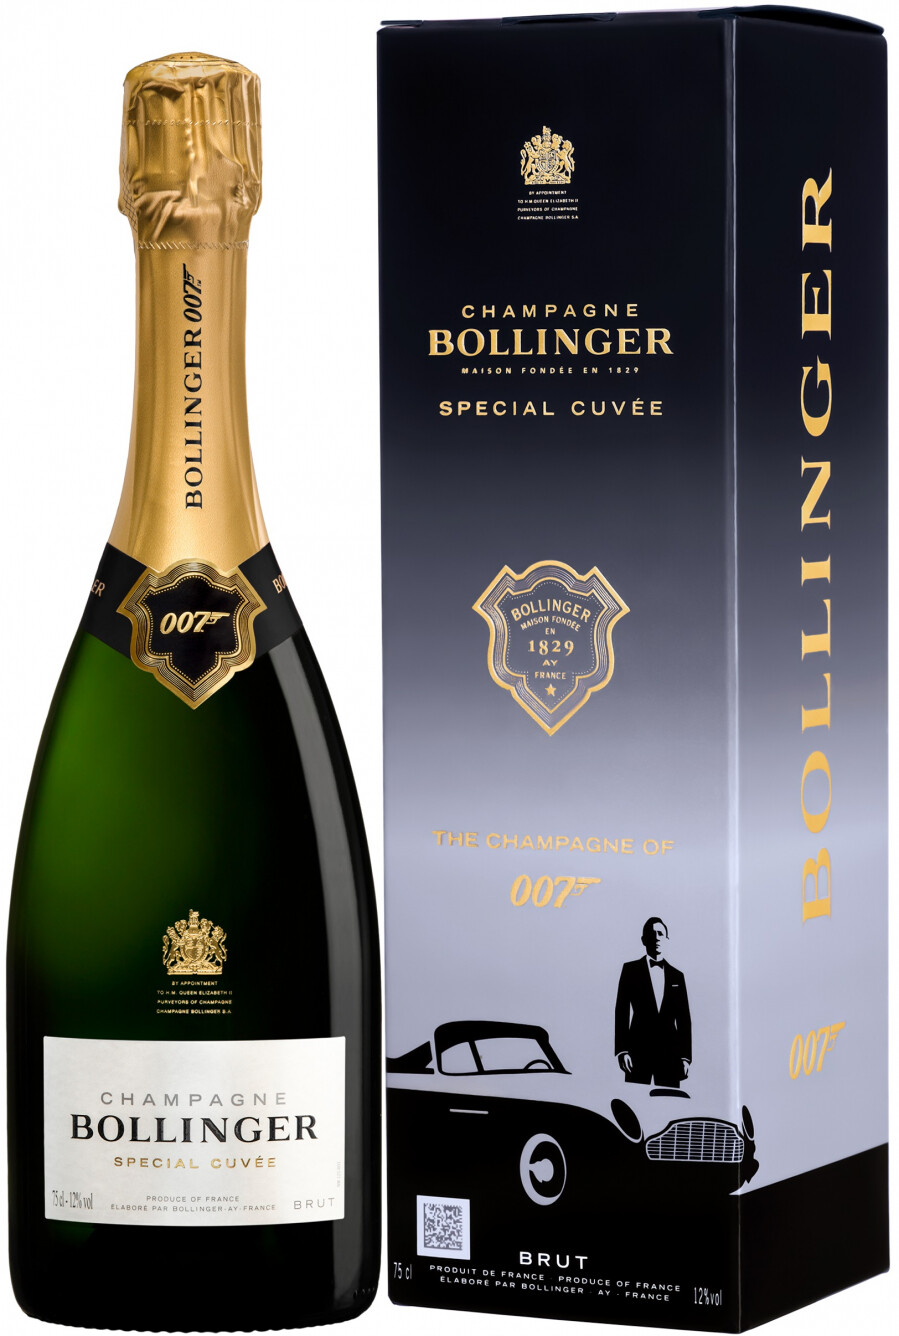 Bollinger Special Cuvee 007 Brut gift box